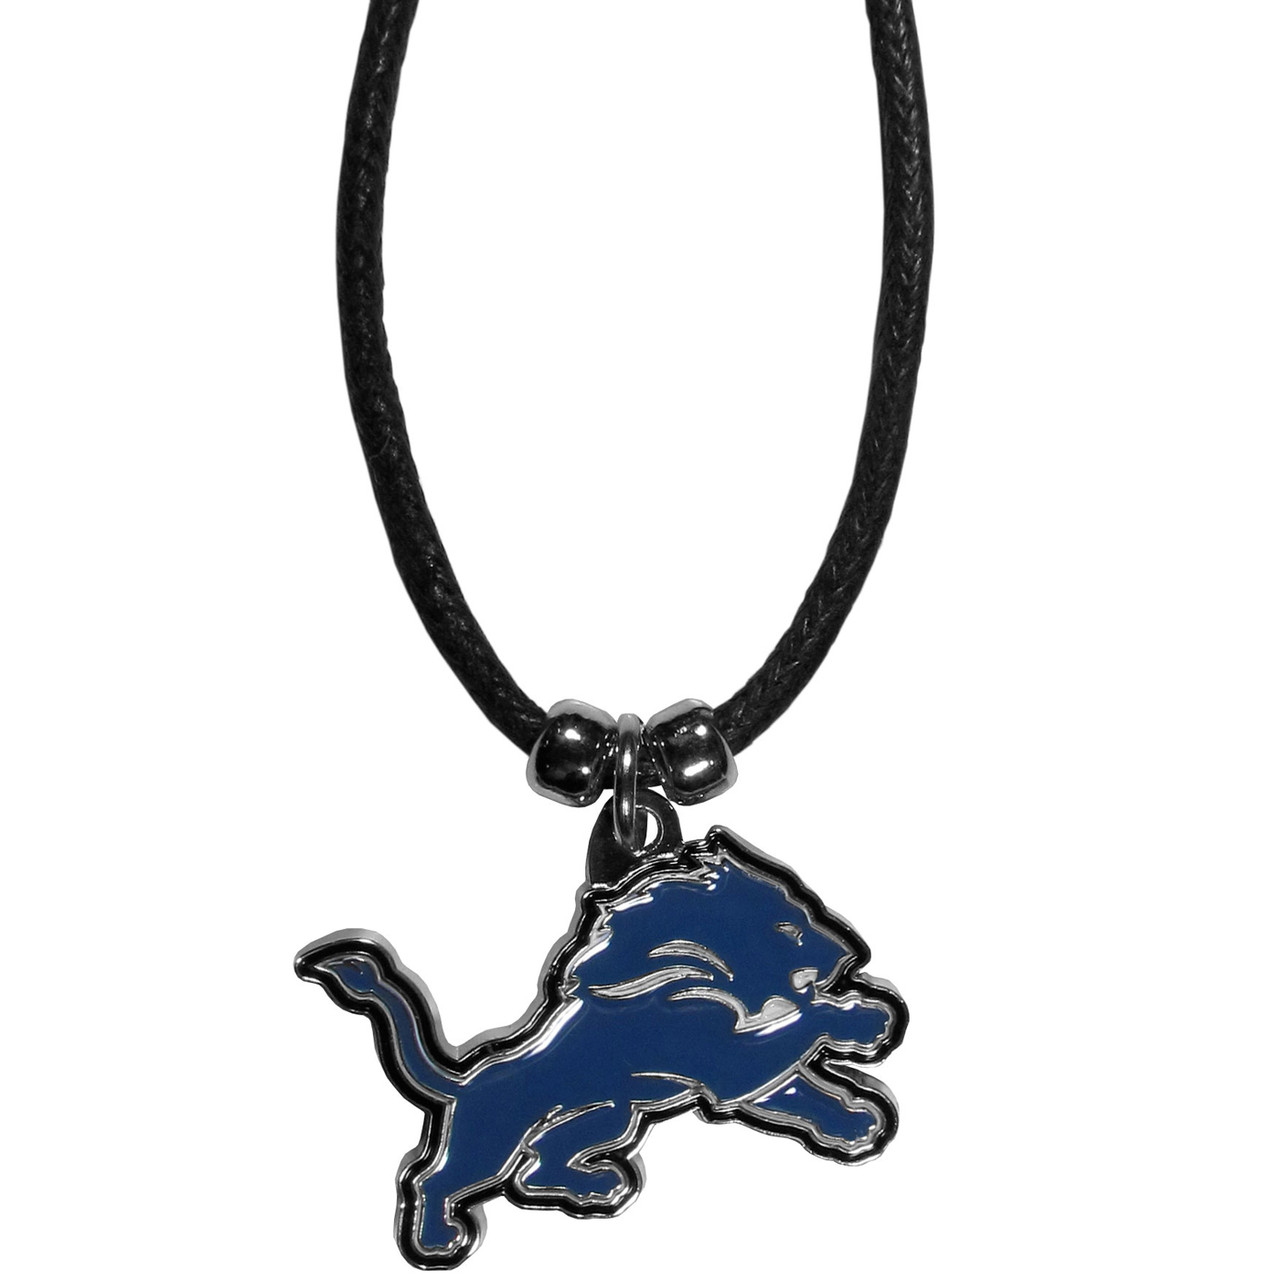 Detroit Lions Necklace Chain and logo clean Remixed by JabHook - MakerWorld